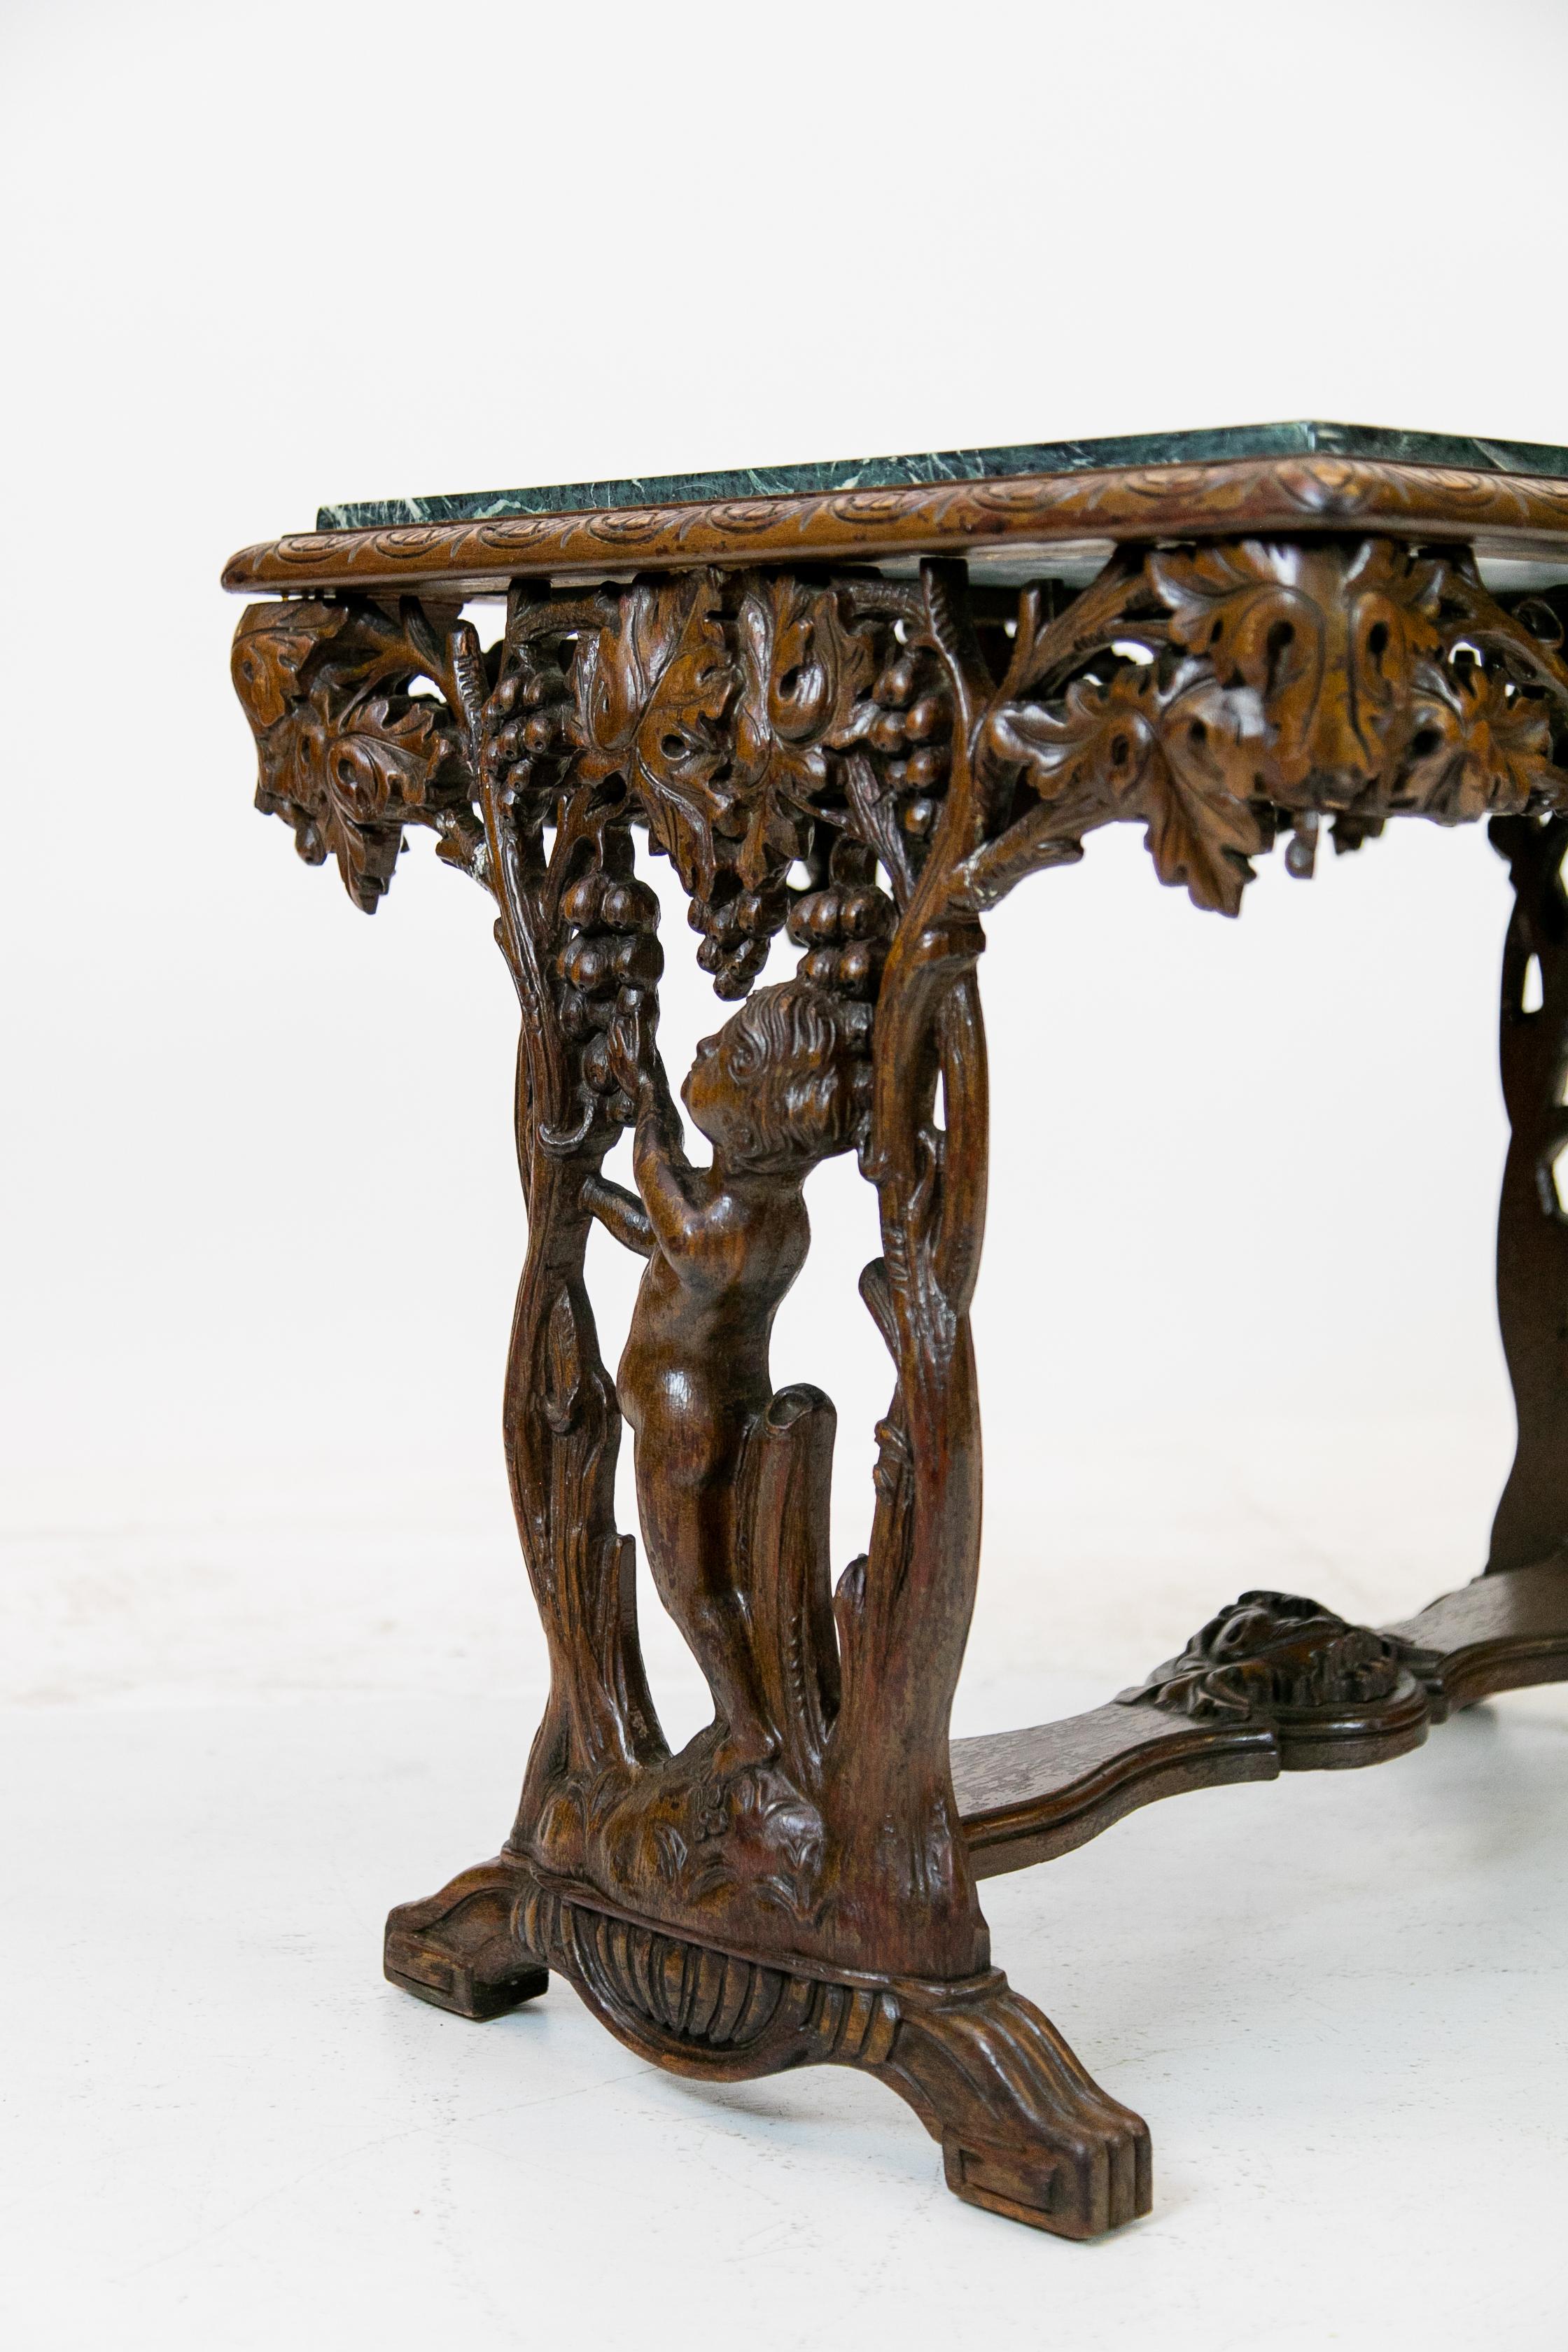 English carved walnut marble-top table, with Verde marble top above carved grape vine and allegorical figures in base.